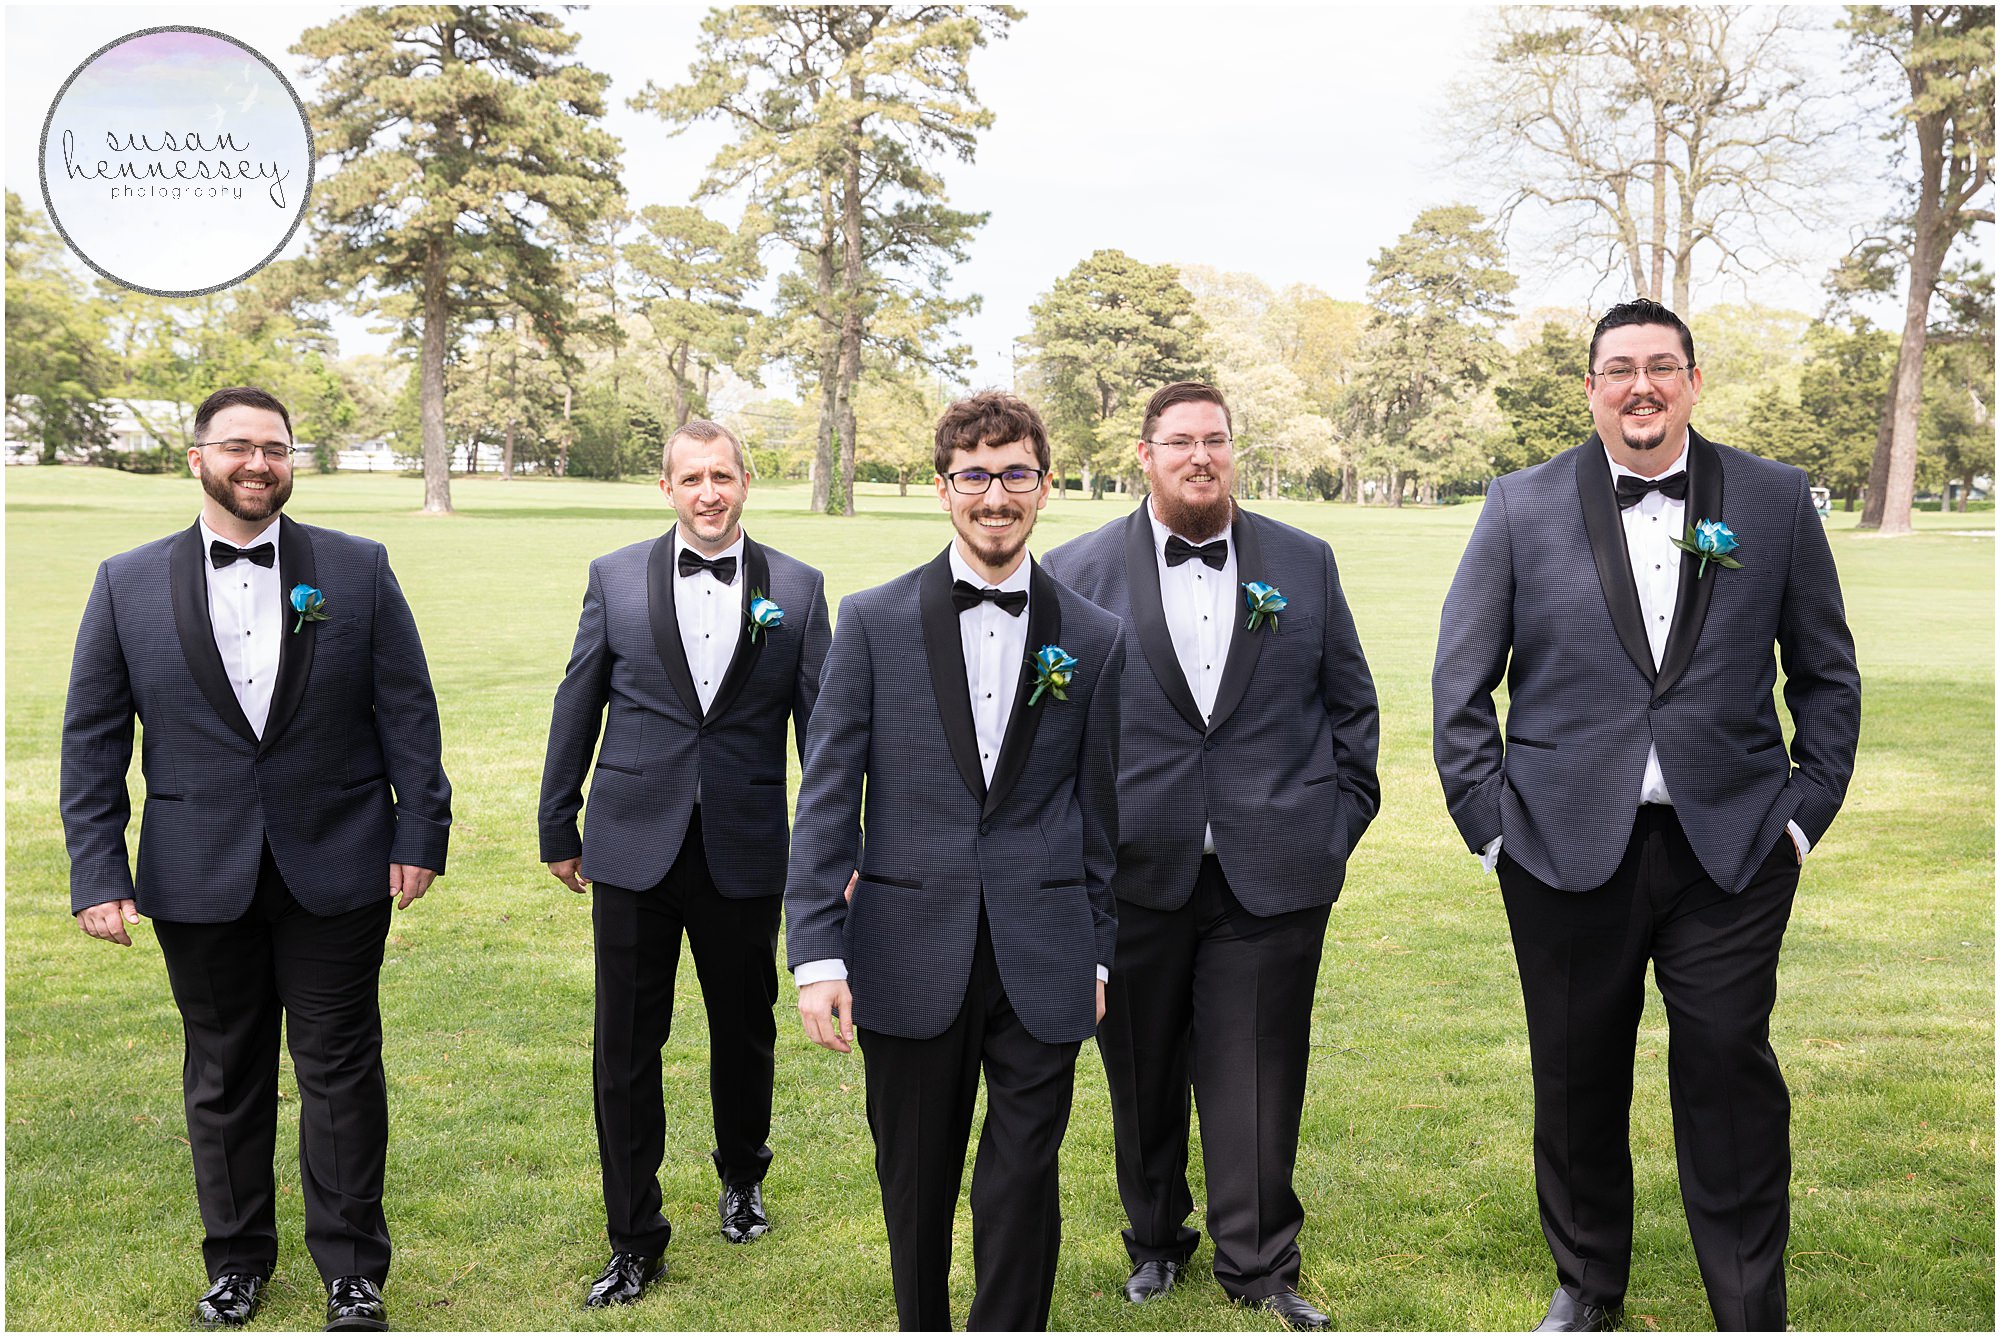 Groom and groomsmen at a spring wedding in somers point, NJ